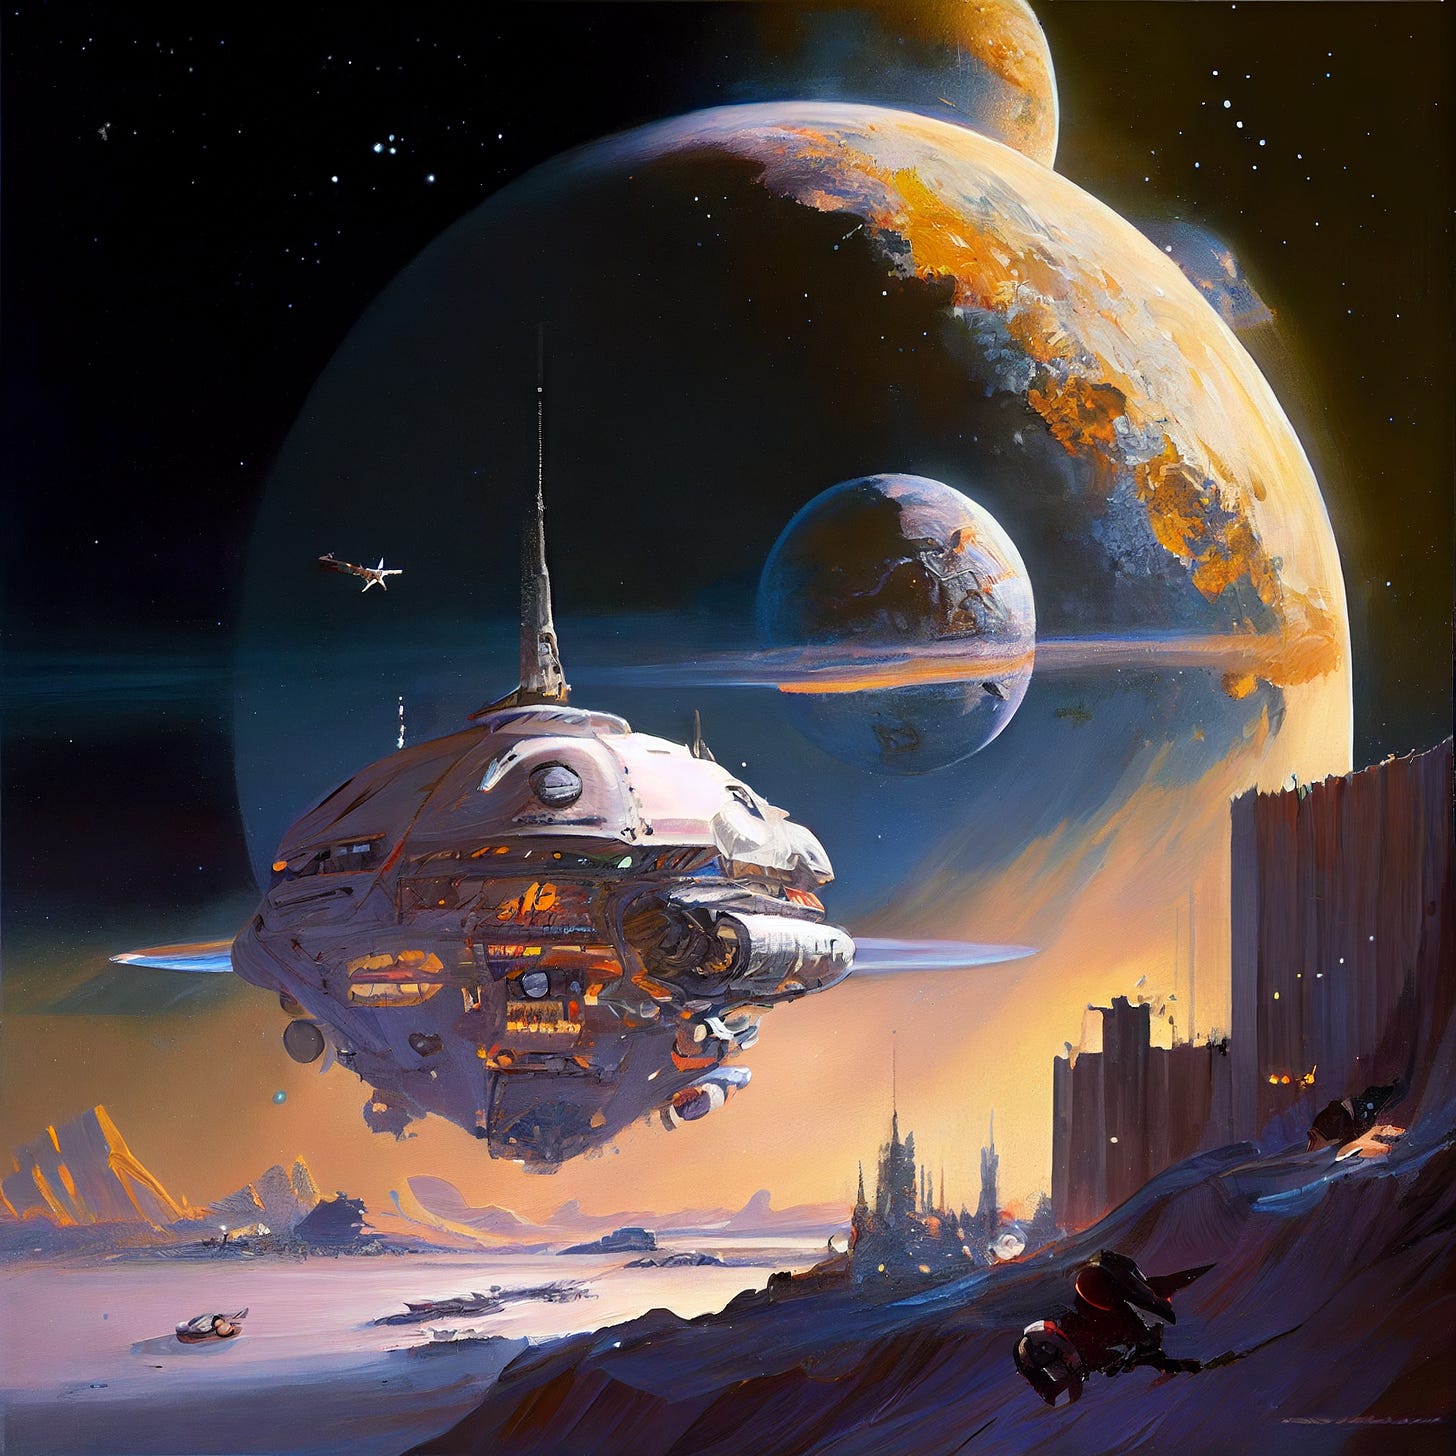 future world, starships, space, planets, humans, stars, similar to Robert McCall paintings